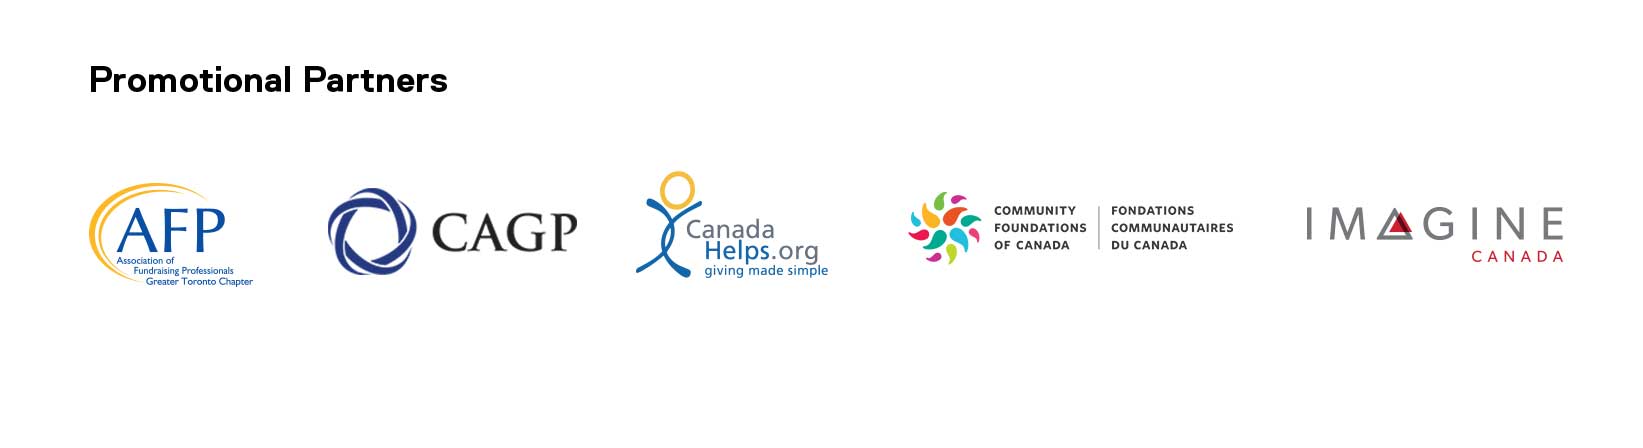 Promotional Partners: Association of Fundraising Professionals; Canadian Association of Gift Planners; Canada Helps; Community Foundations Canada; Imagine Canada